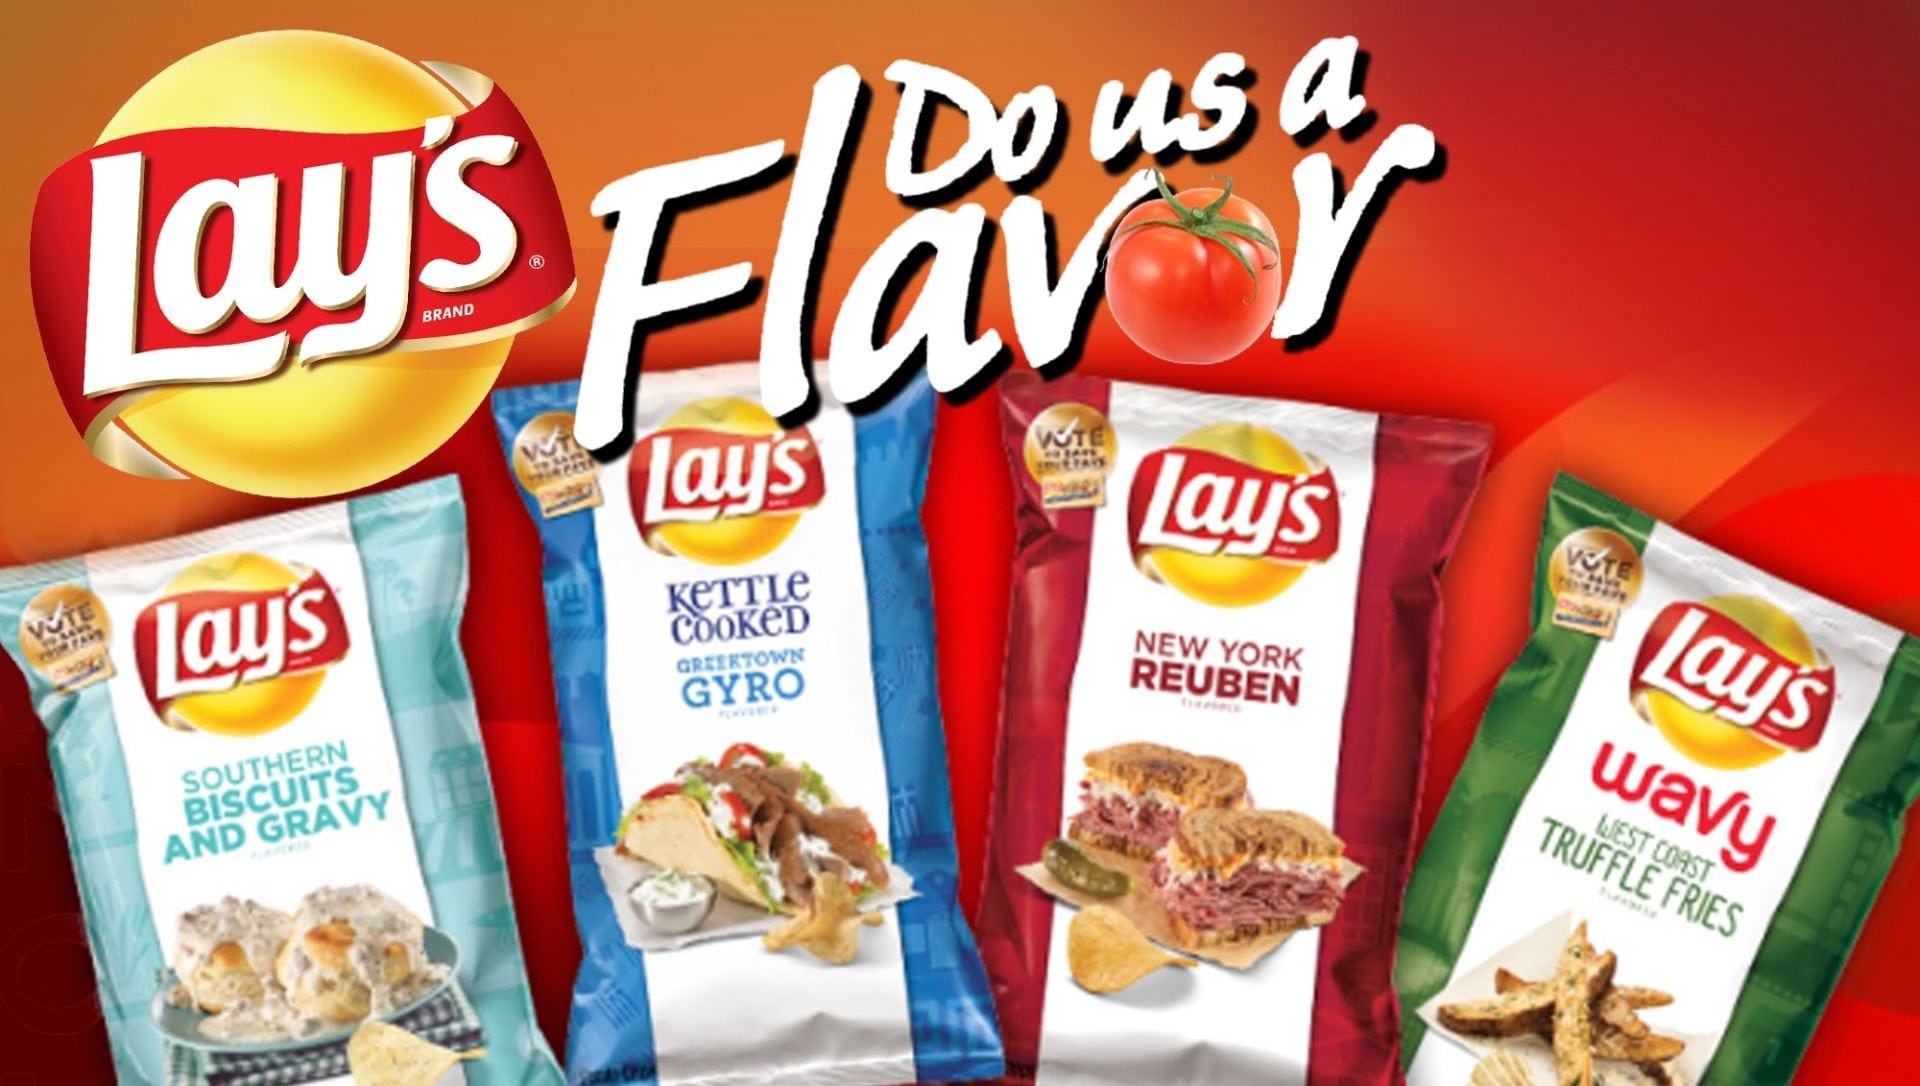 Do Us A Flavor” Lay's Case Study | The Life of Lauren: College Edition